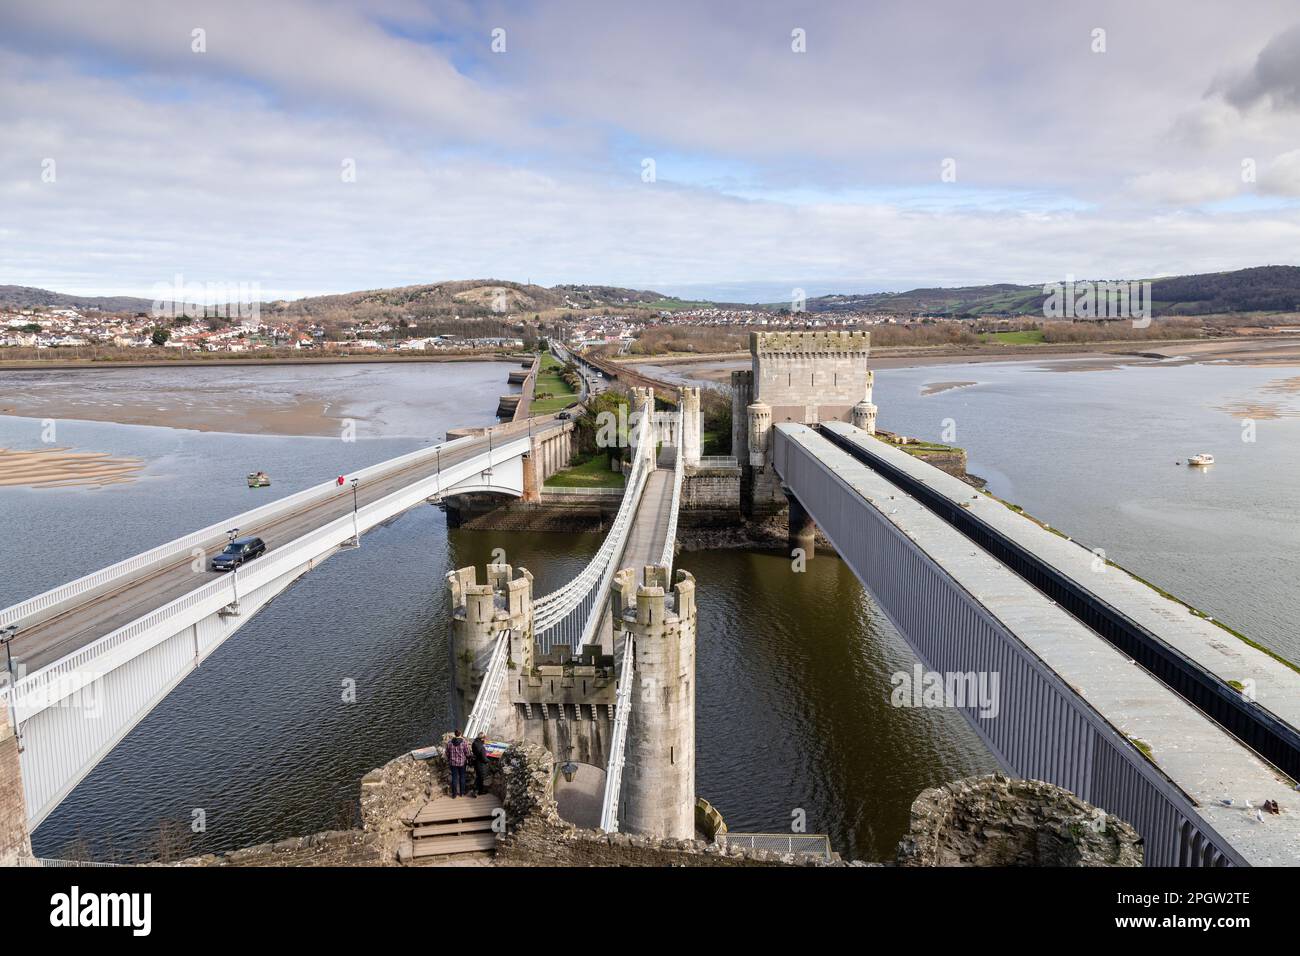 Road, rail and suspension bridges over the river Conwy, Conway, North Wales coast Stock Photo